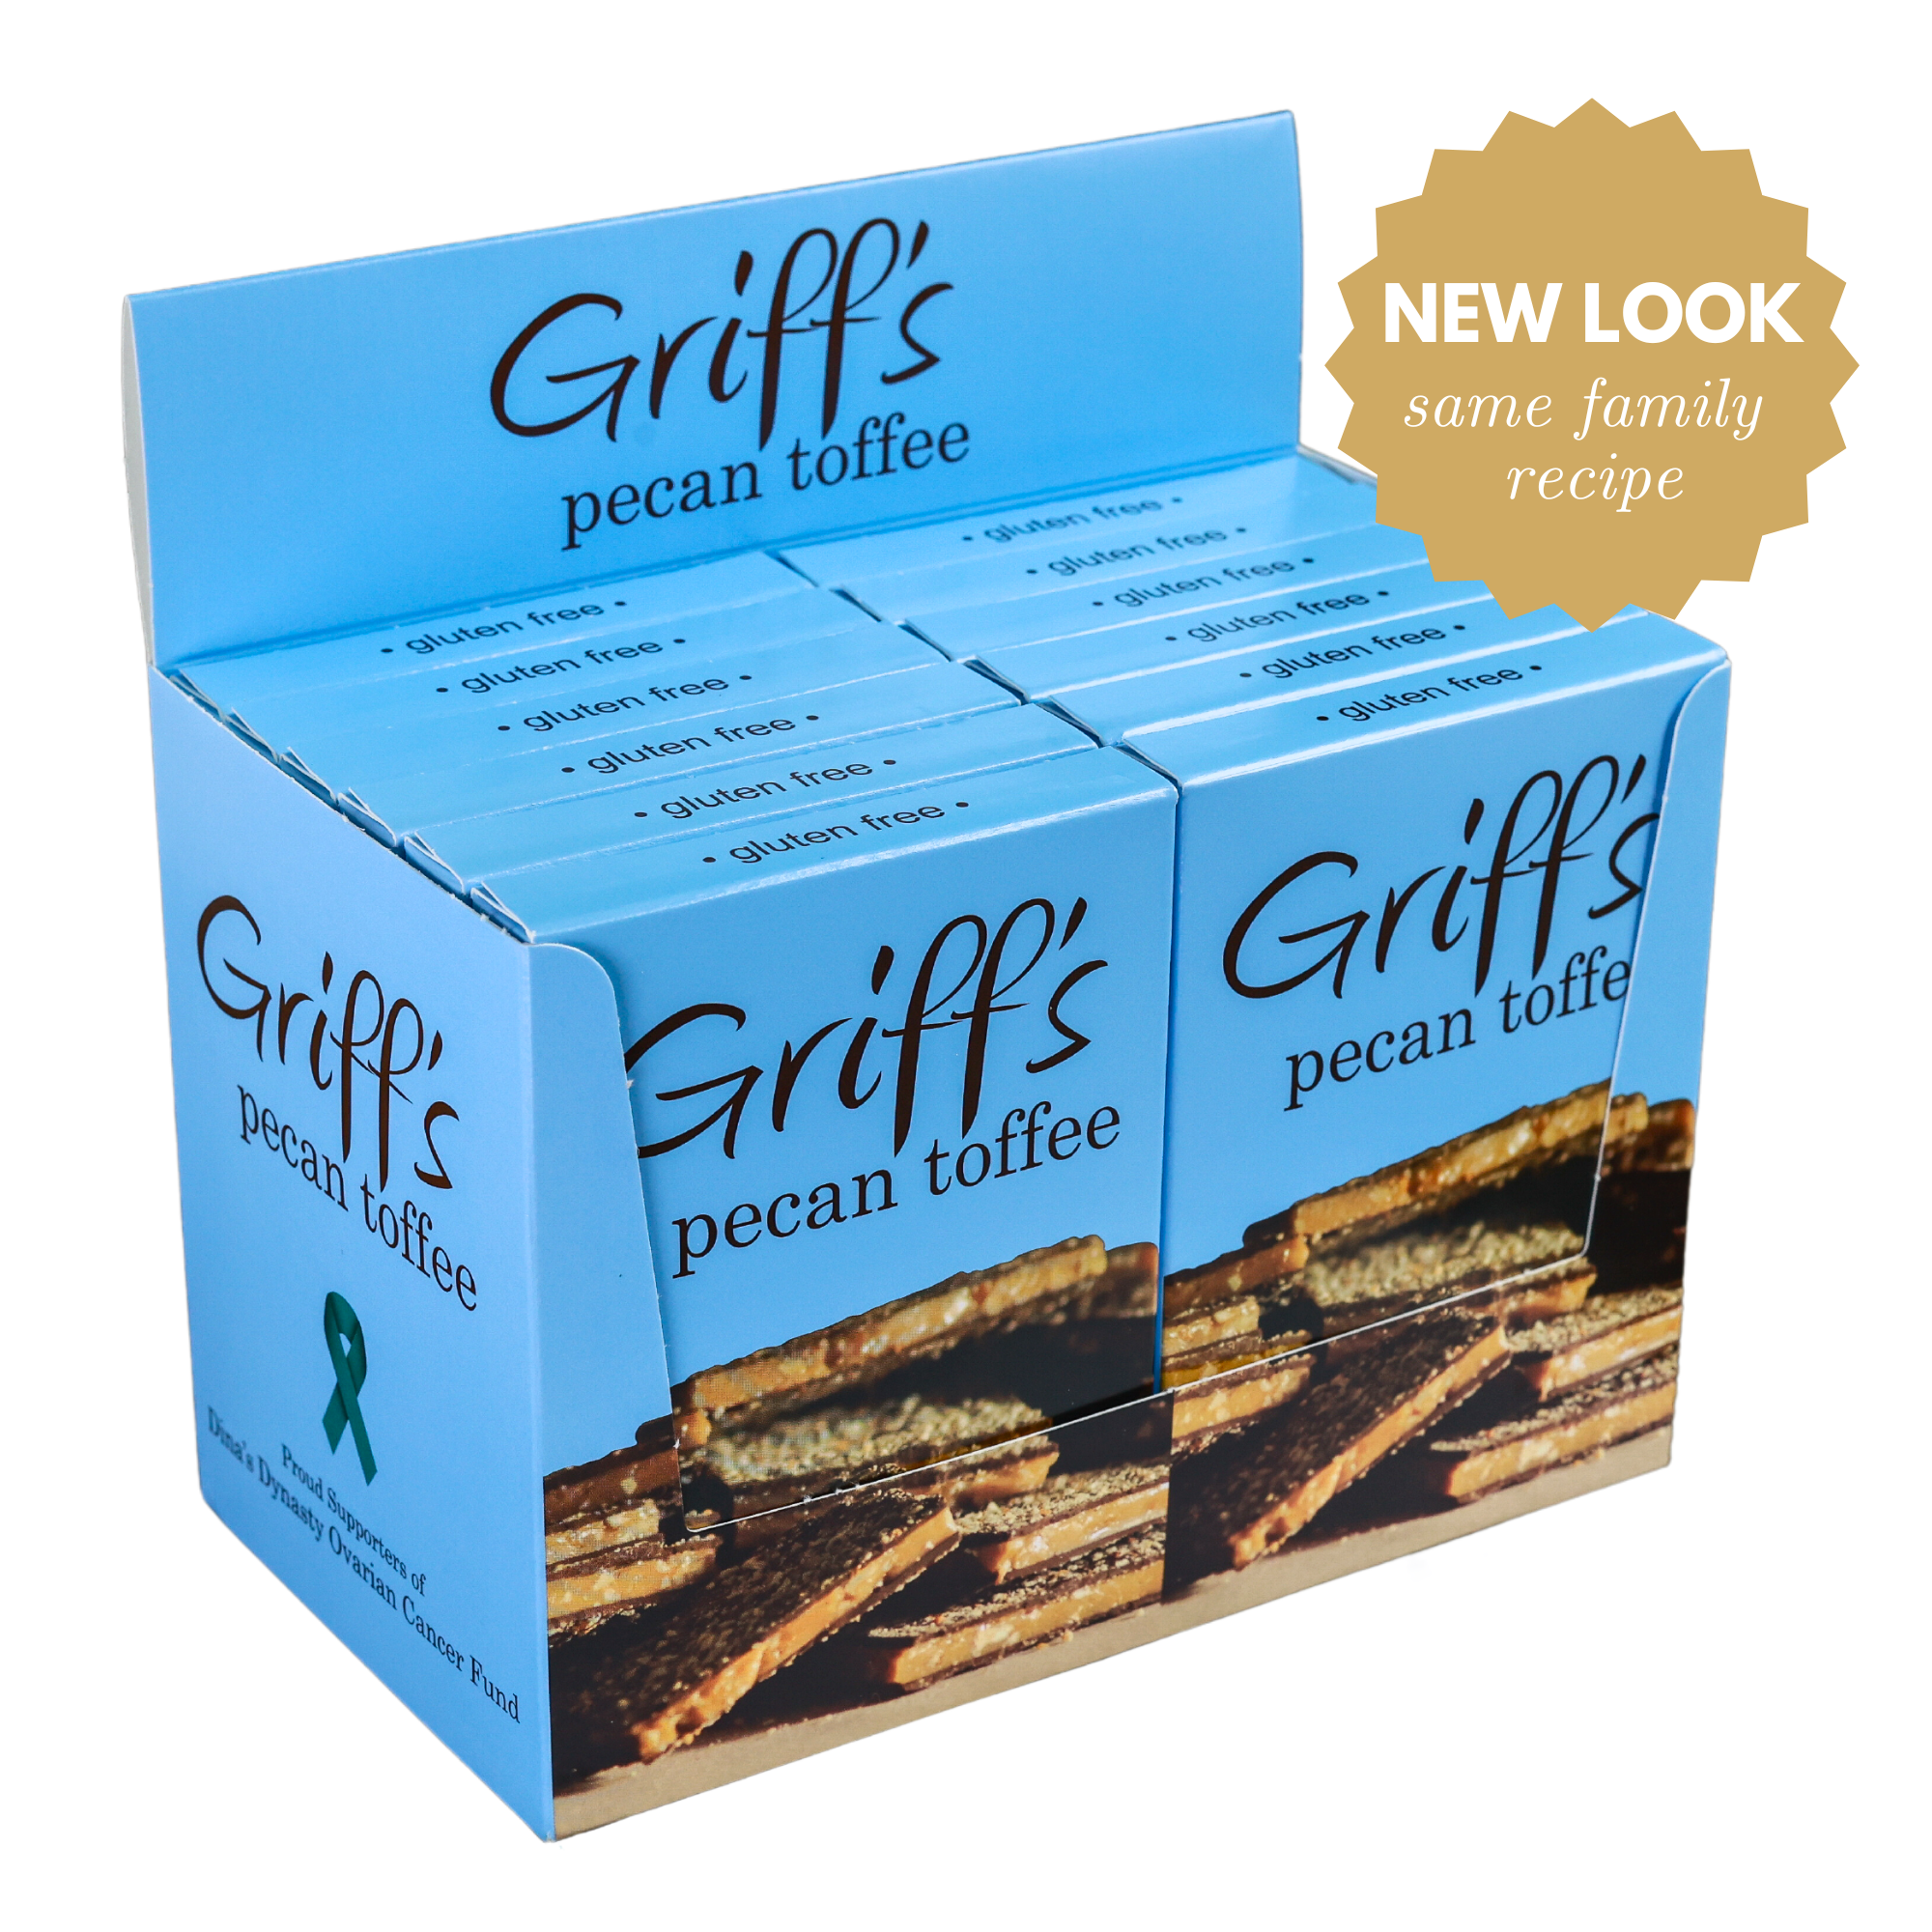 Griff's Pecan Toffee - 2oz Dark Chocolate Toffee